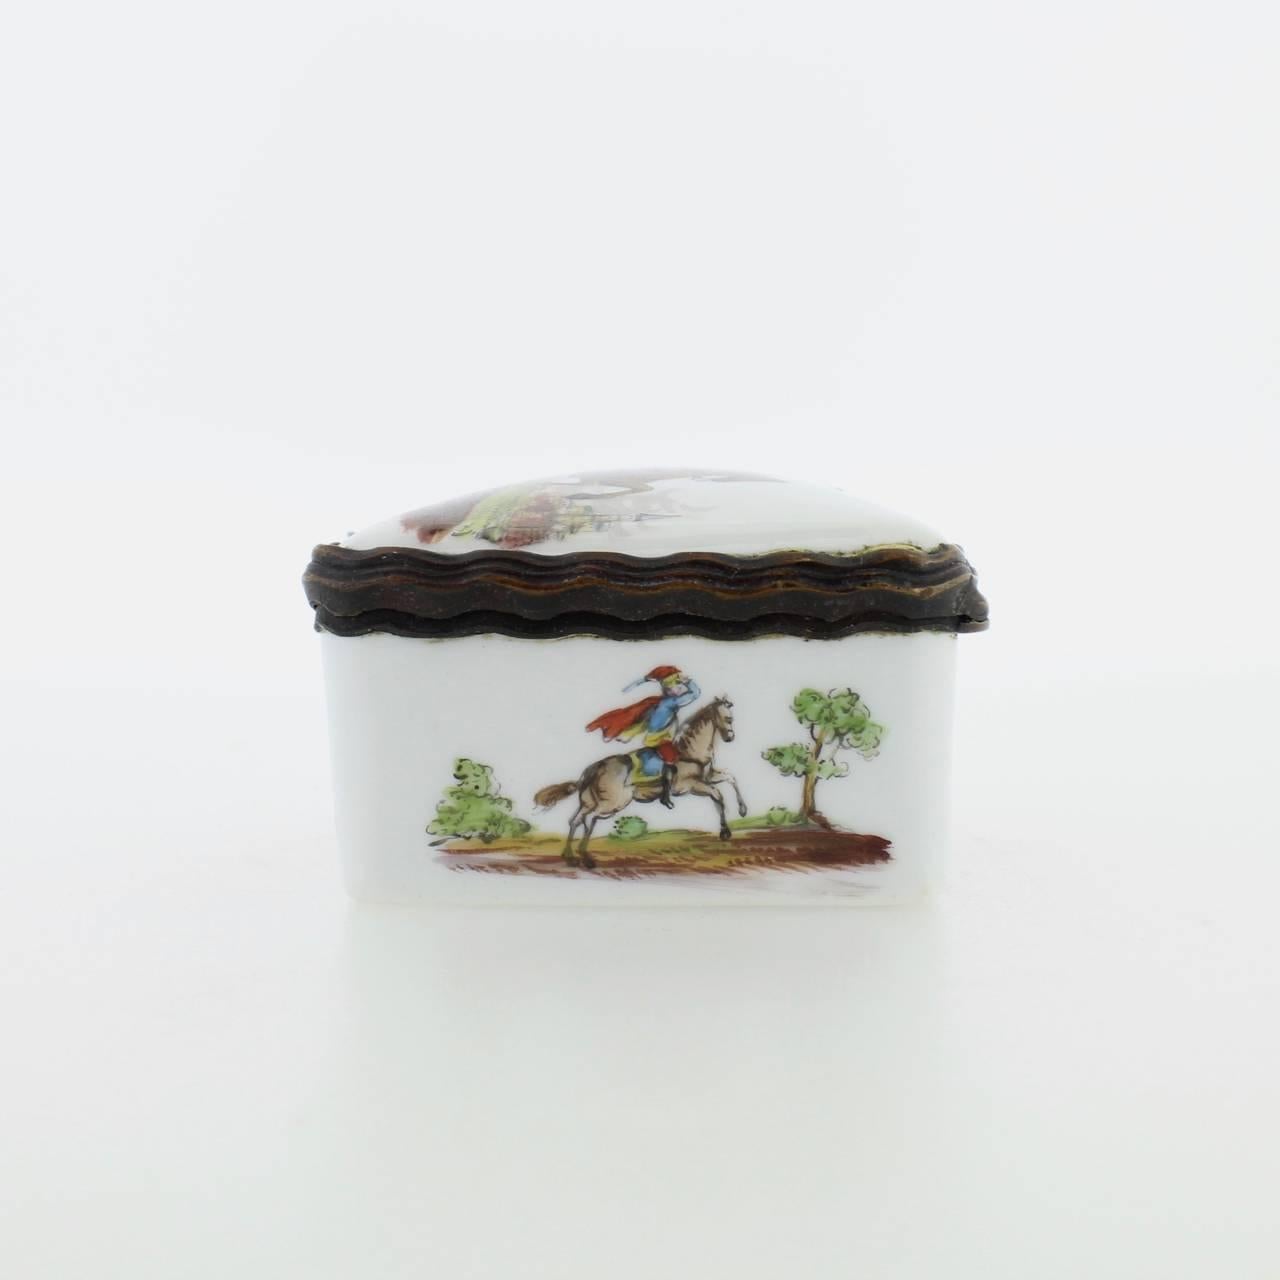 Antique French or German Porcelain Snuff Box with Hand-Painted Military Scenes For Sale 1